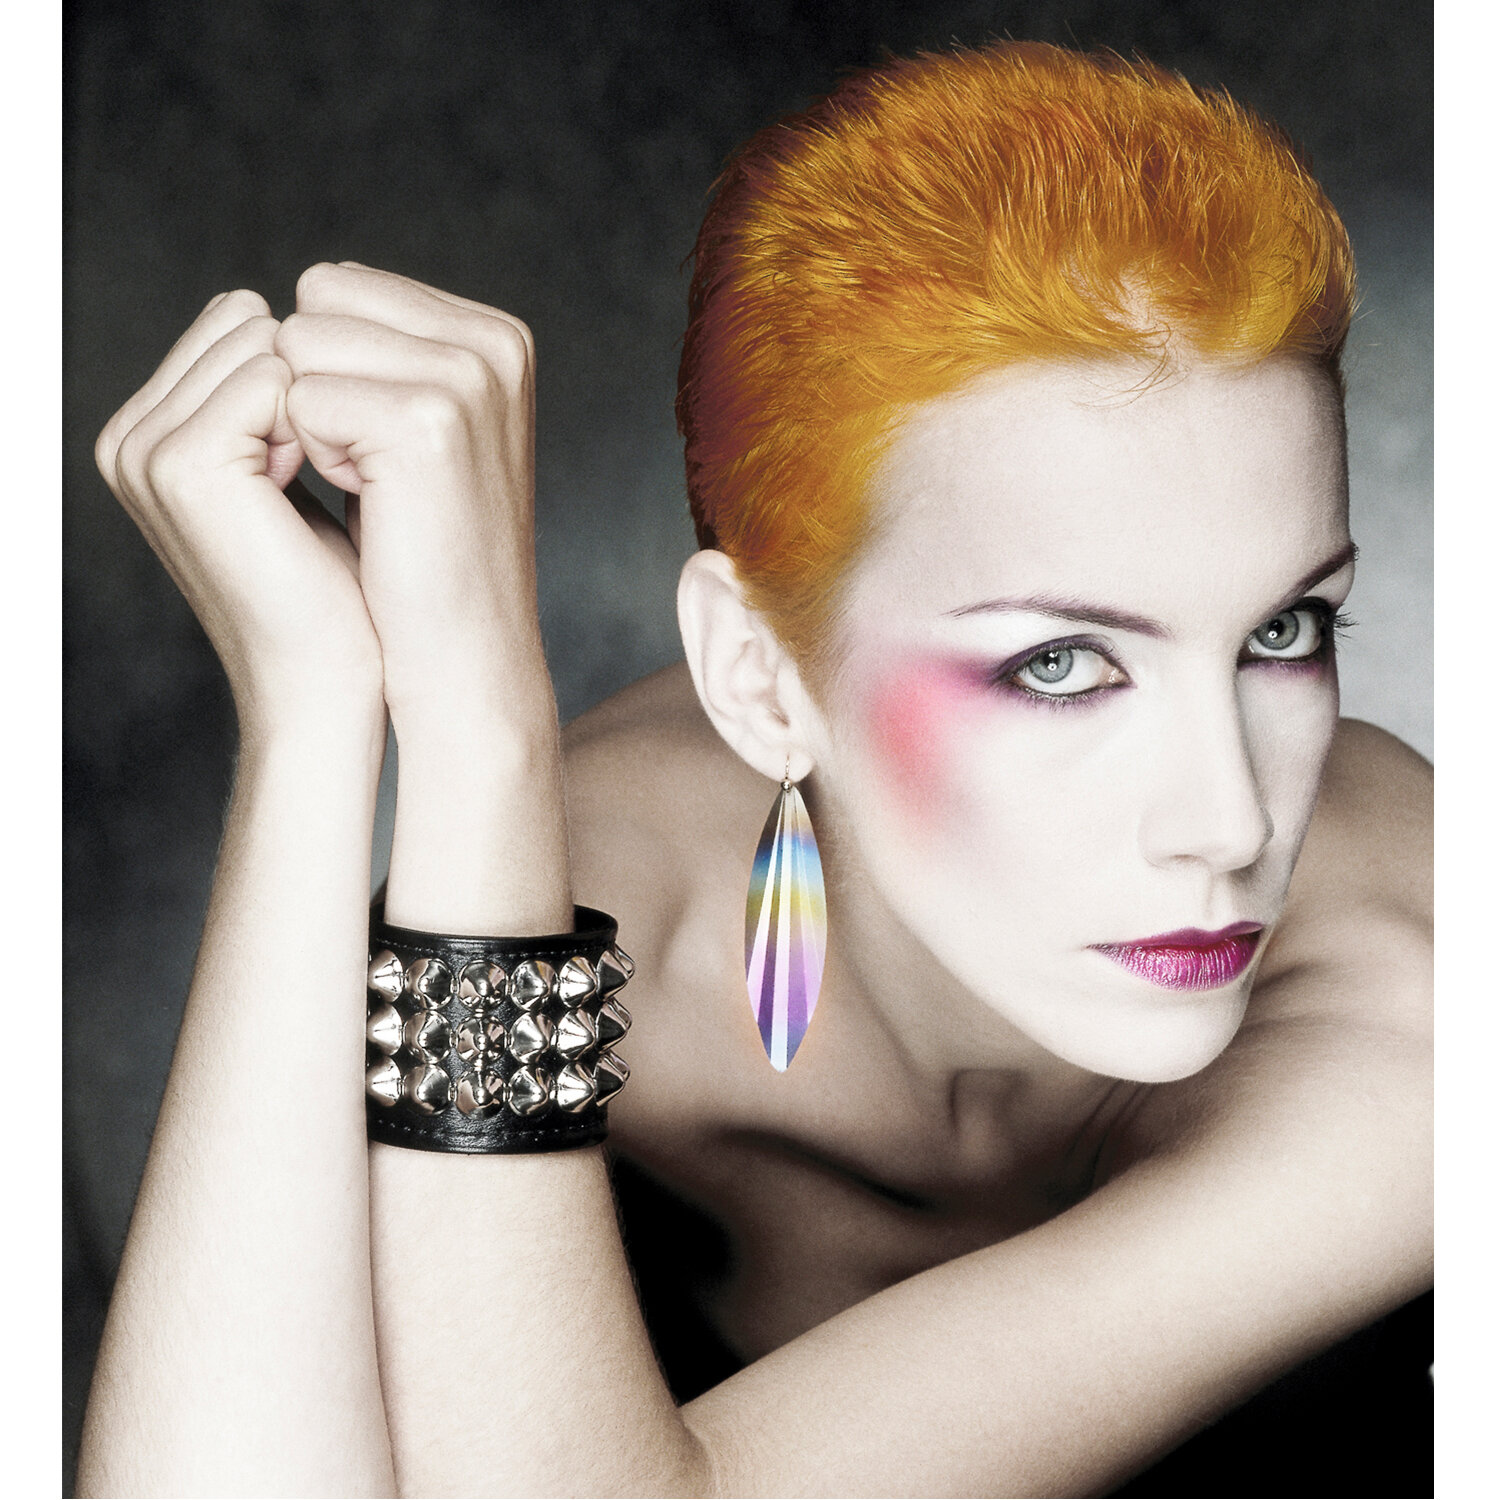 Signed limited edition print of Annie Lennox of Eurythmics, photographed by...